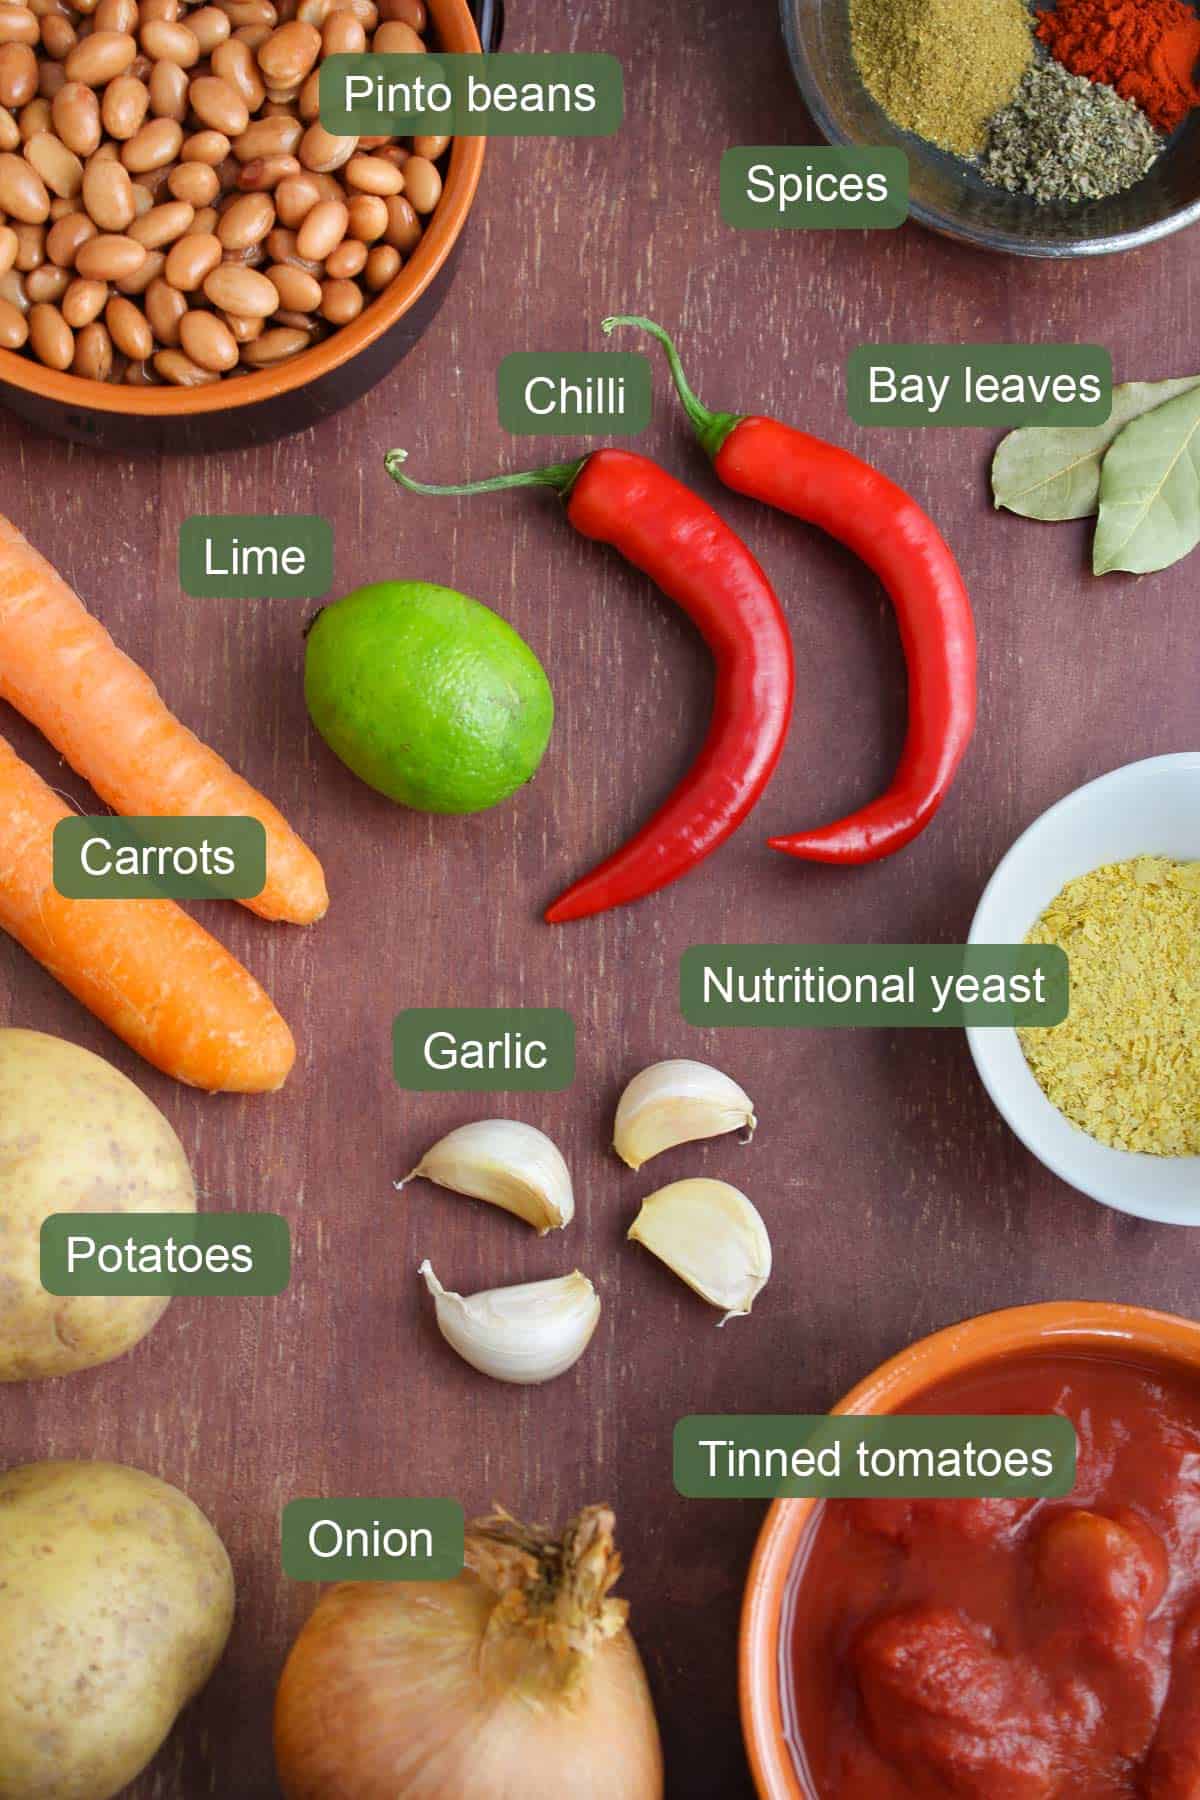 List of Ingredients to Make Pinto Bean Soup